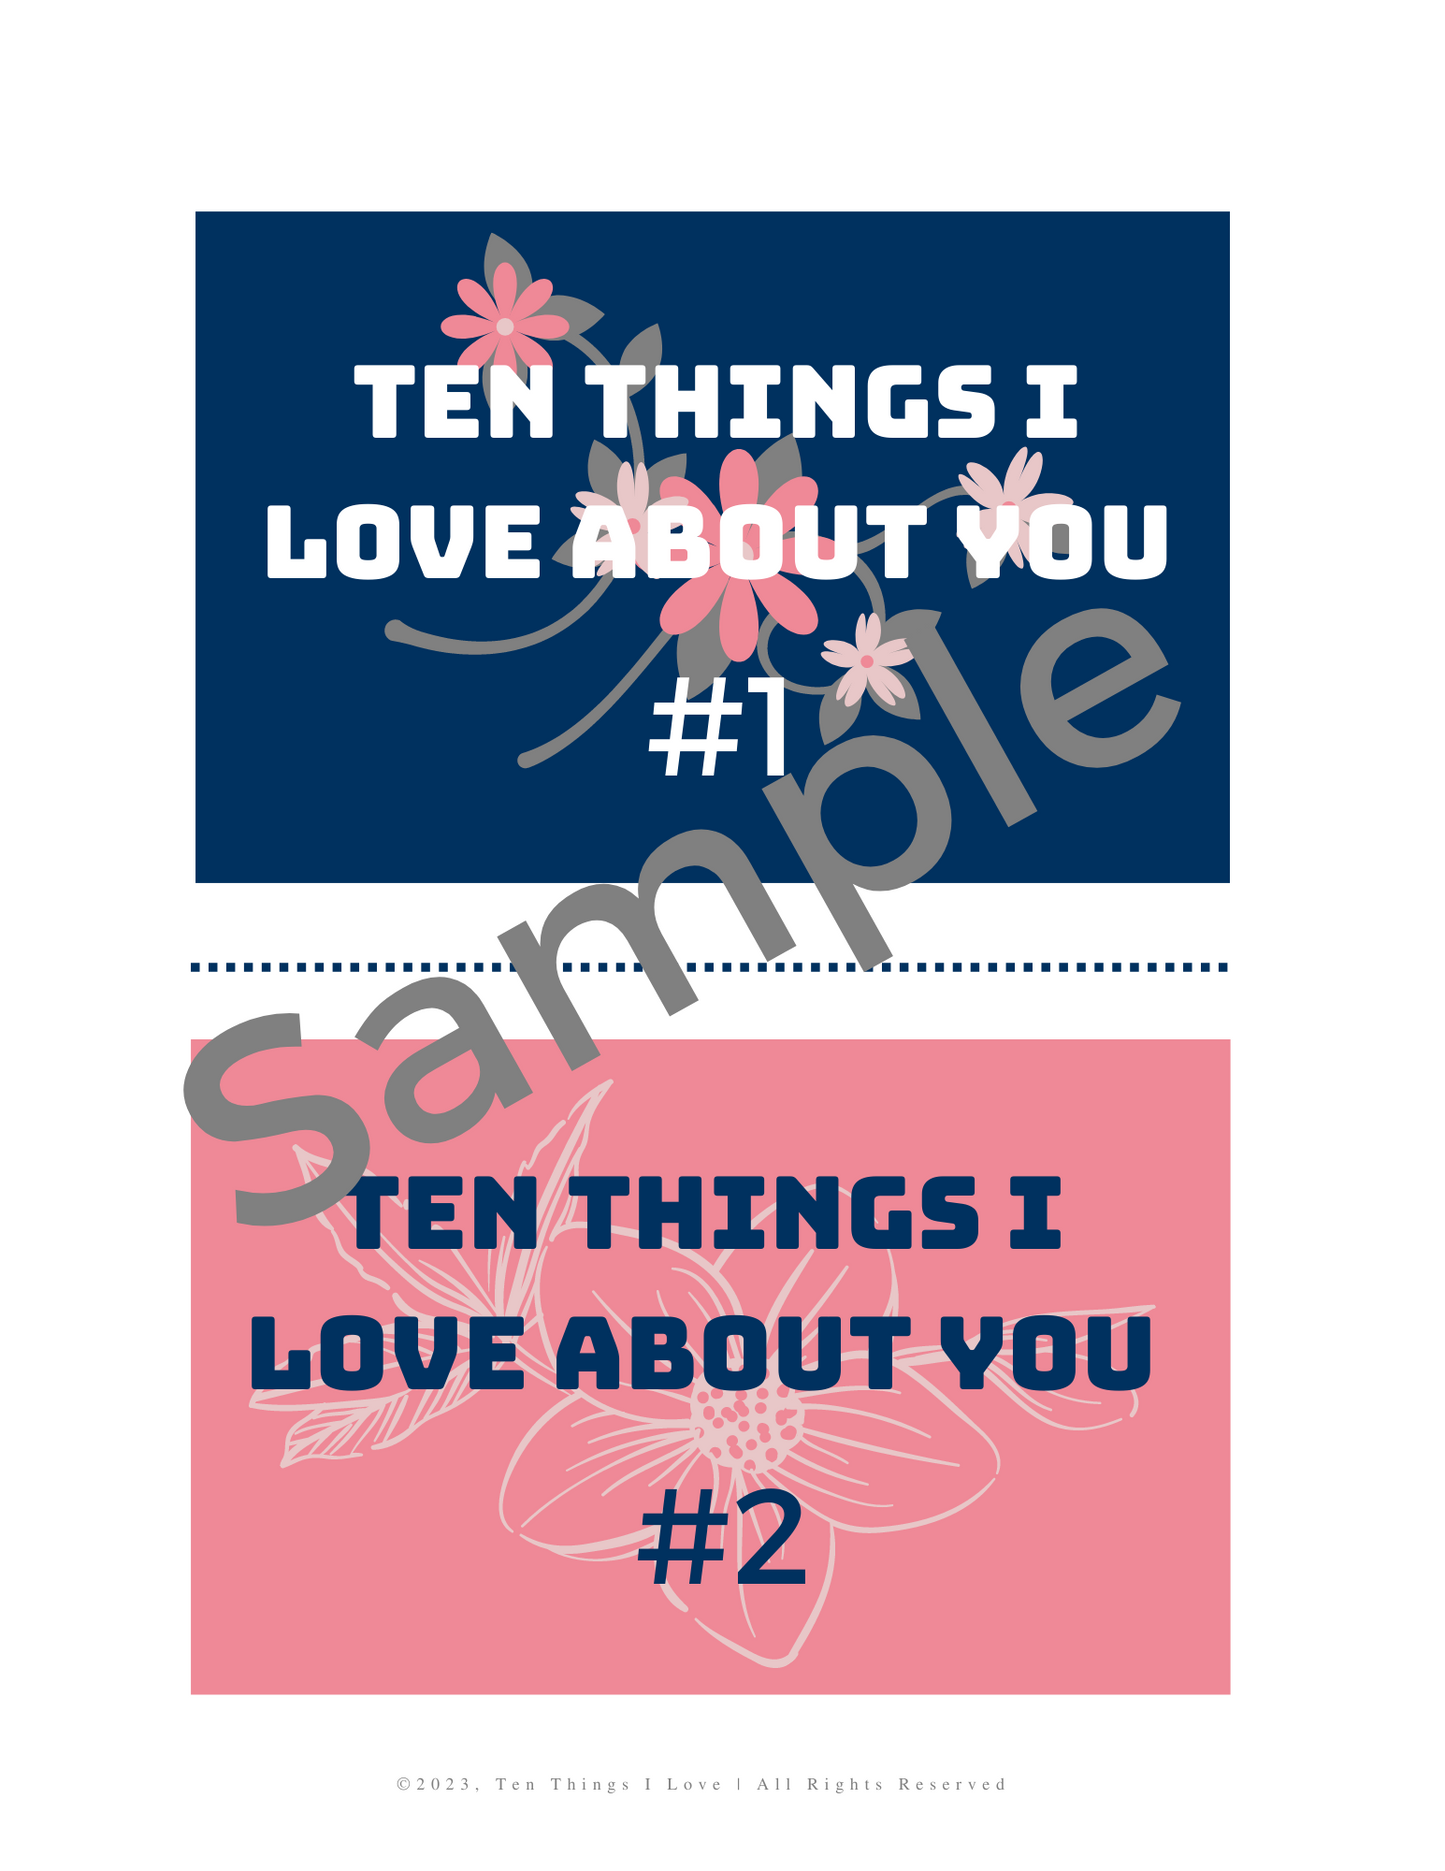 Ten Things I Love About You Printable Cards - Free Download